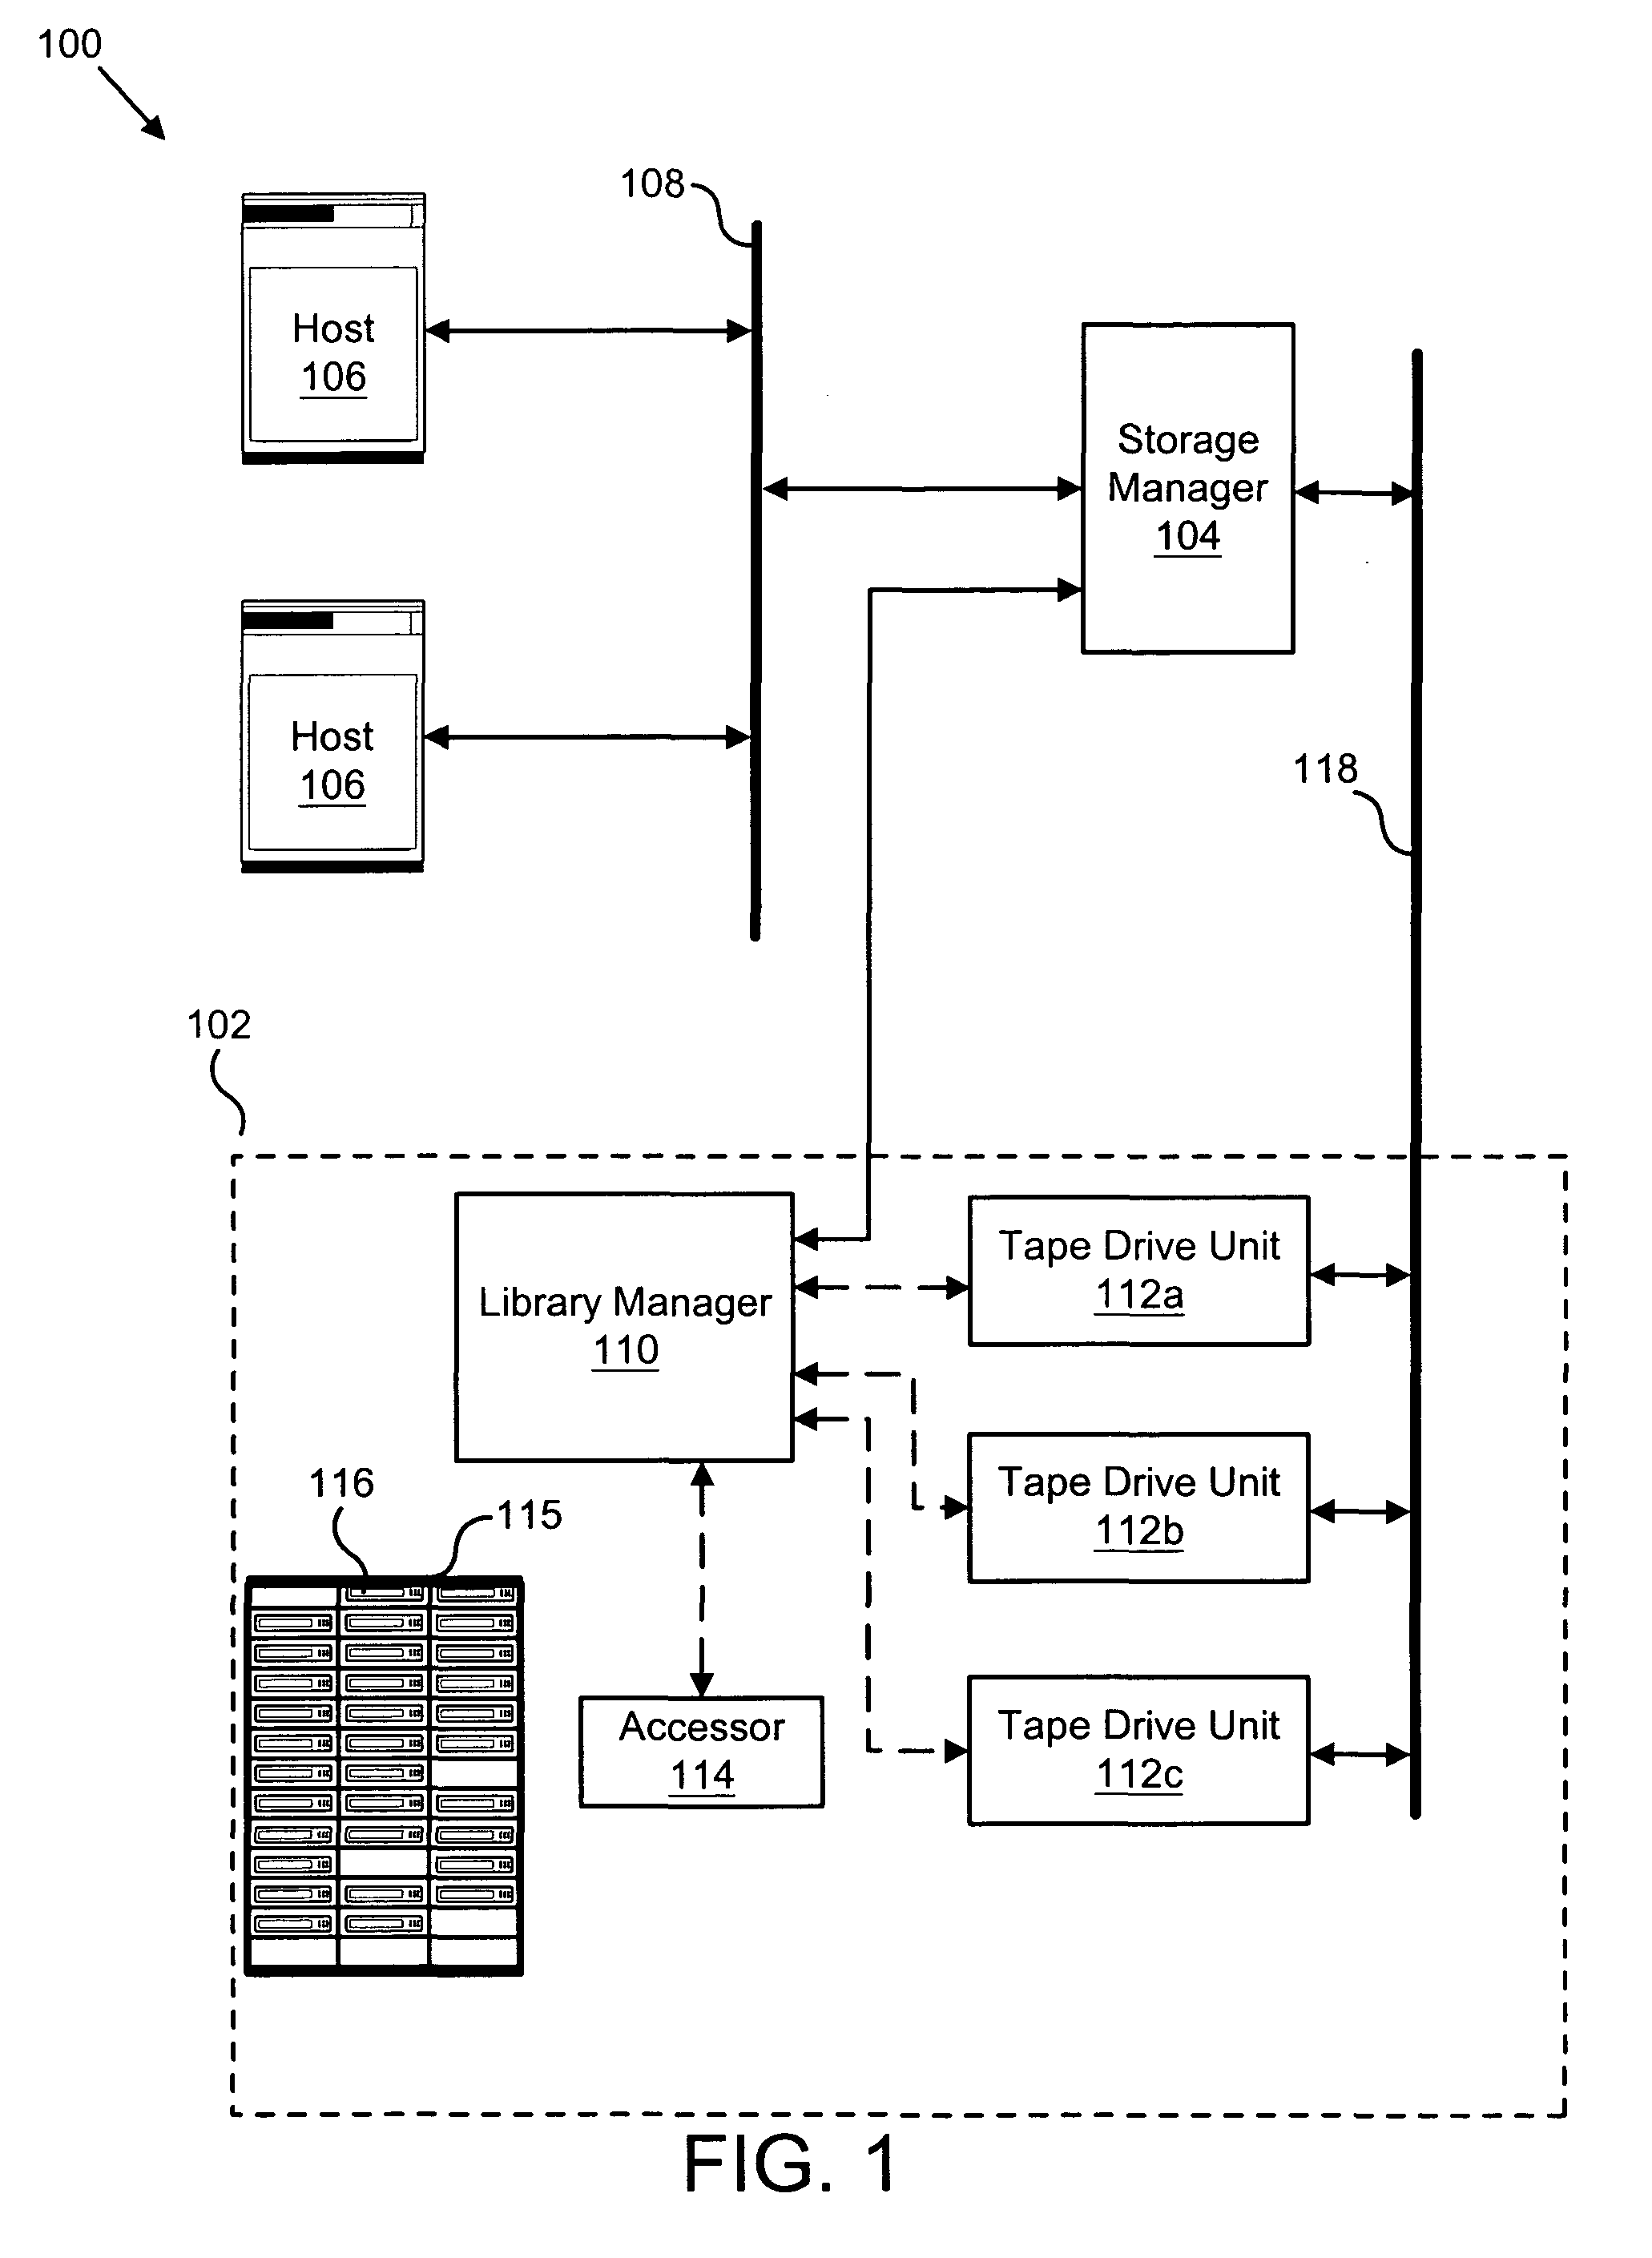 Apparatus, system, and method for developing failure prediction software